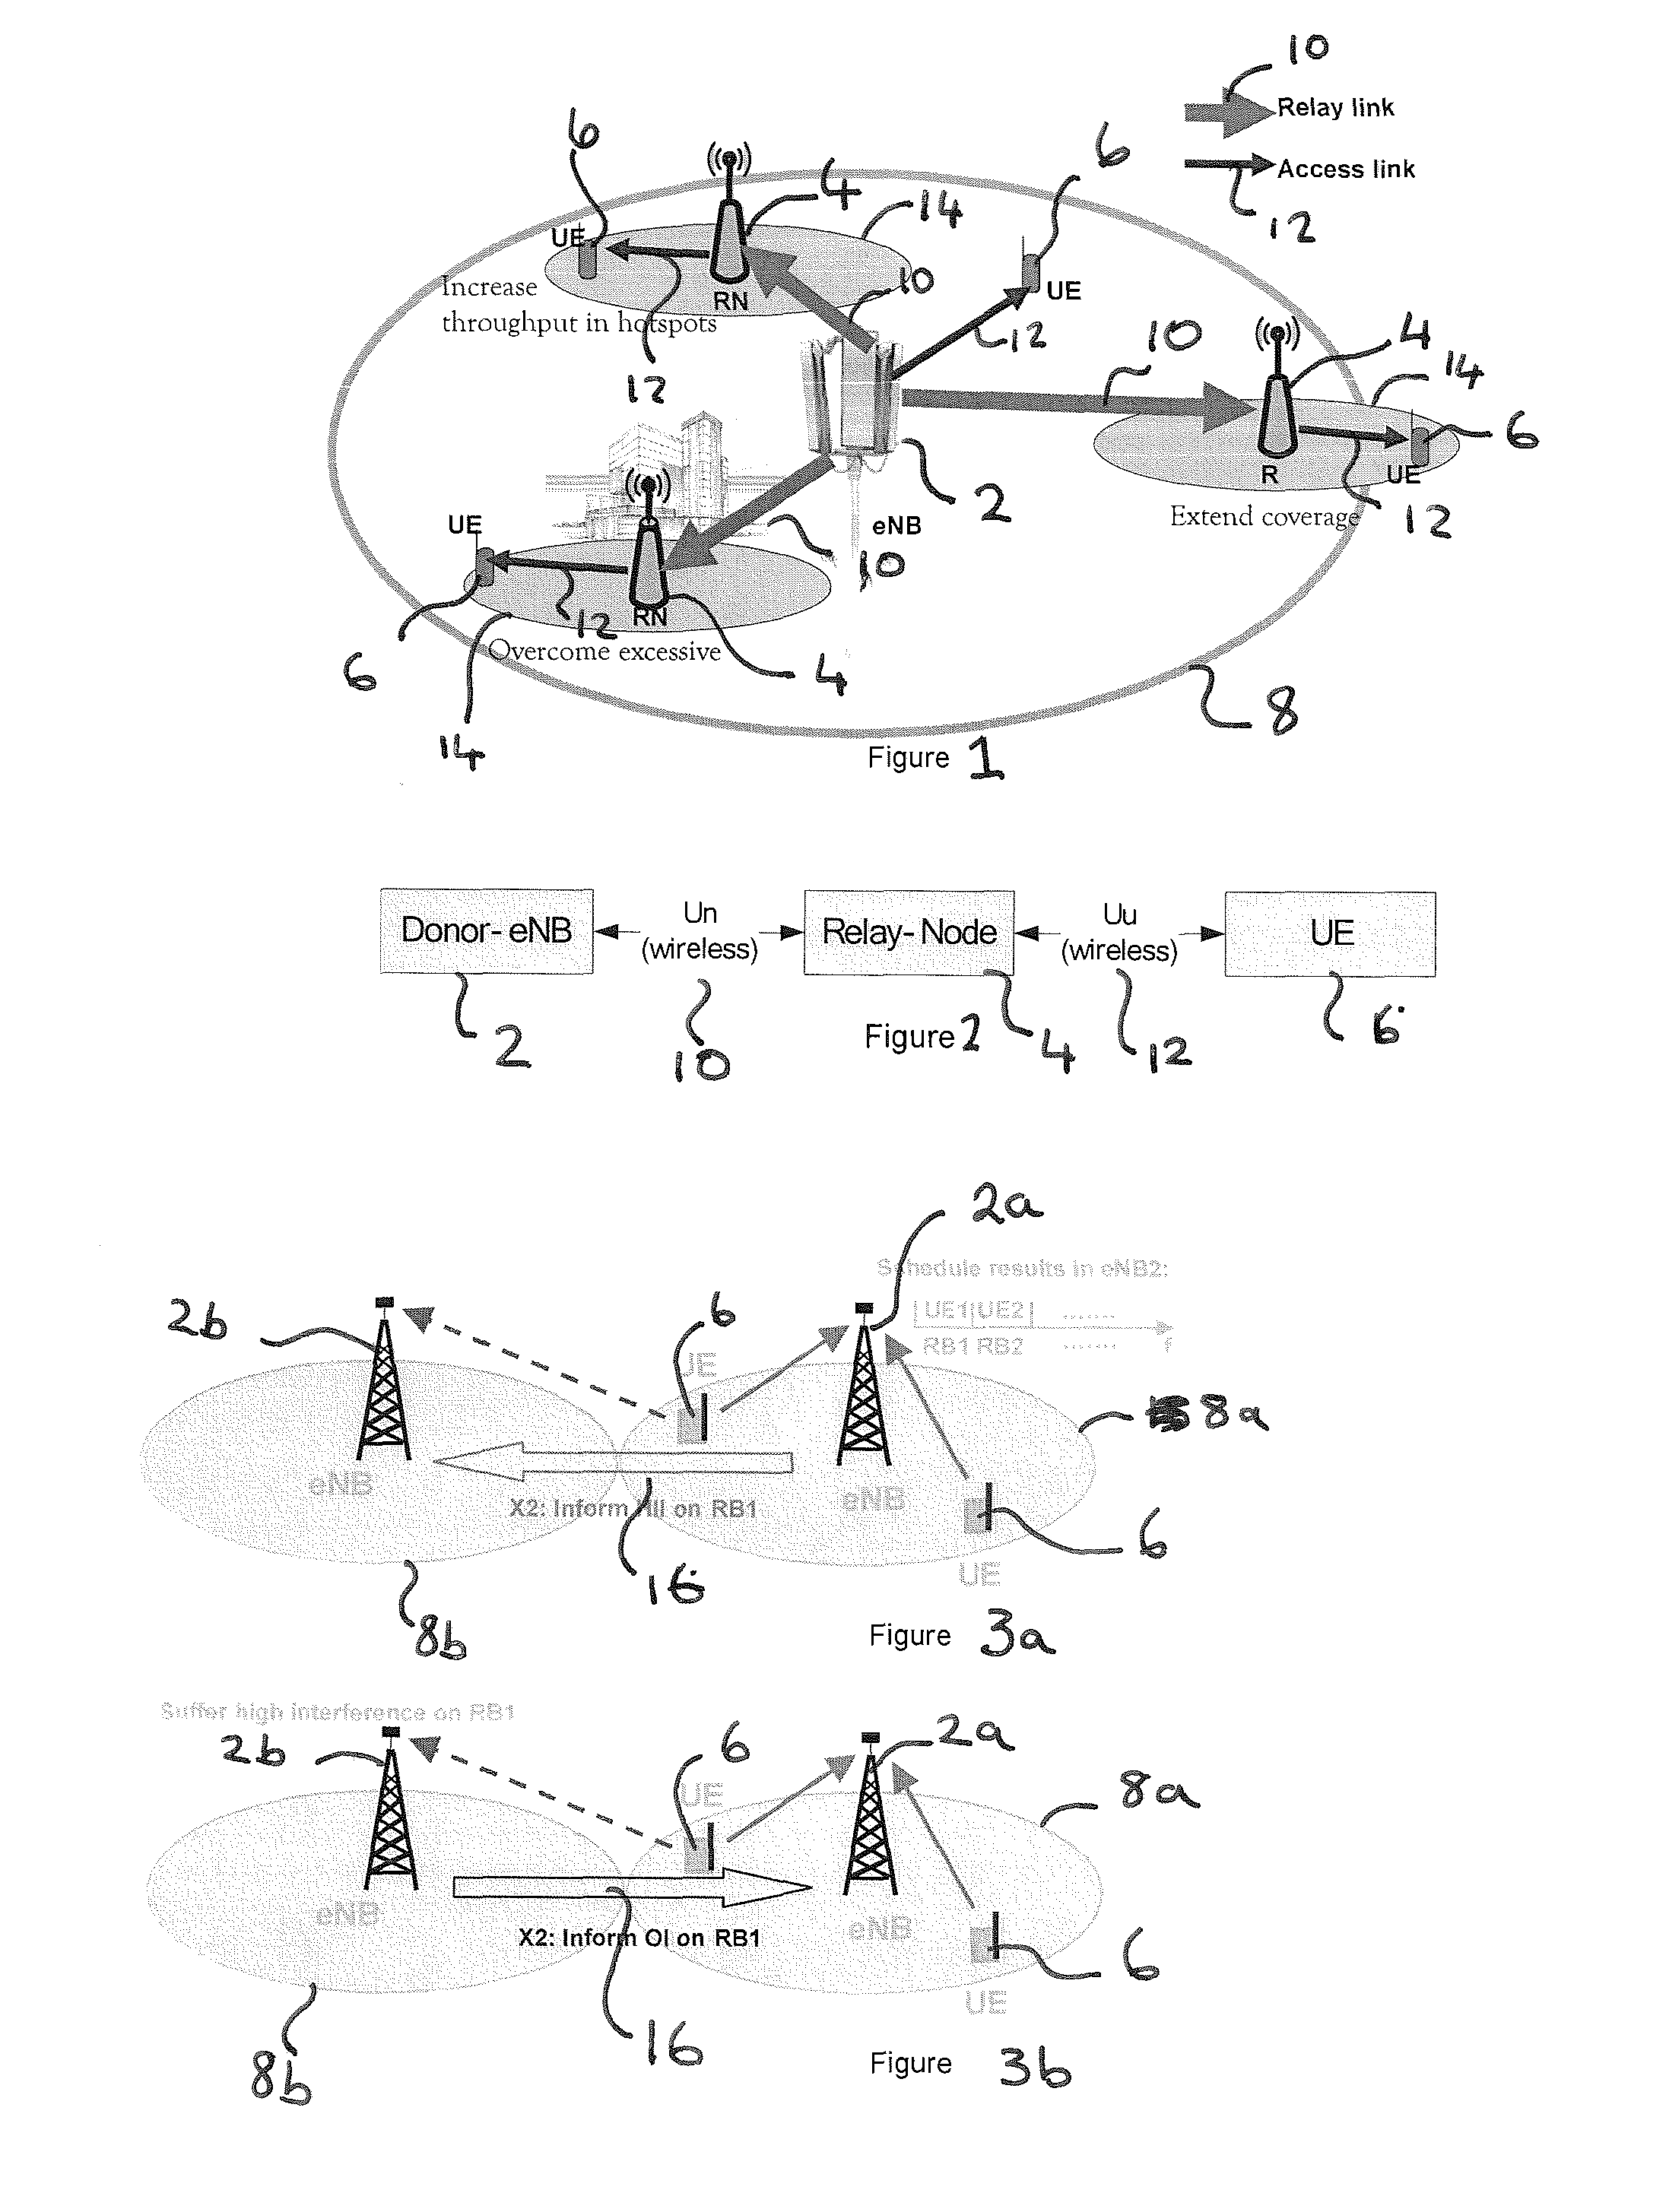 Method And Apparatus For Transmitting Load Information Among Nodes In A Radio System